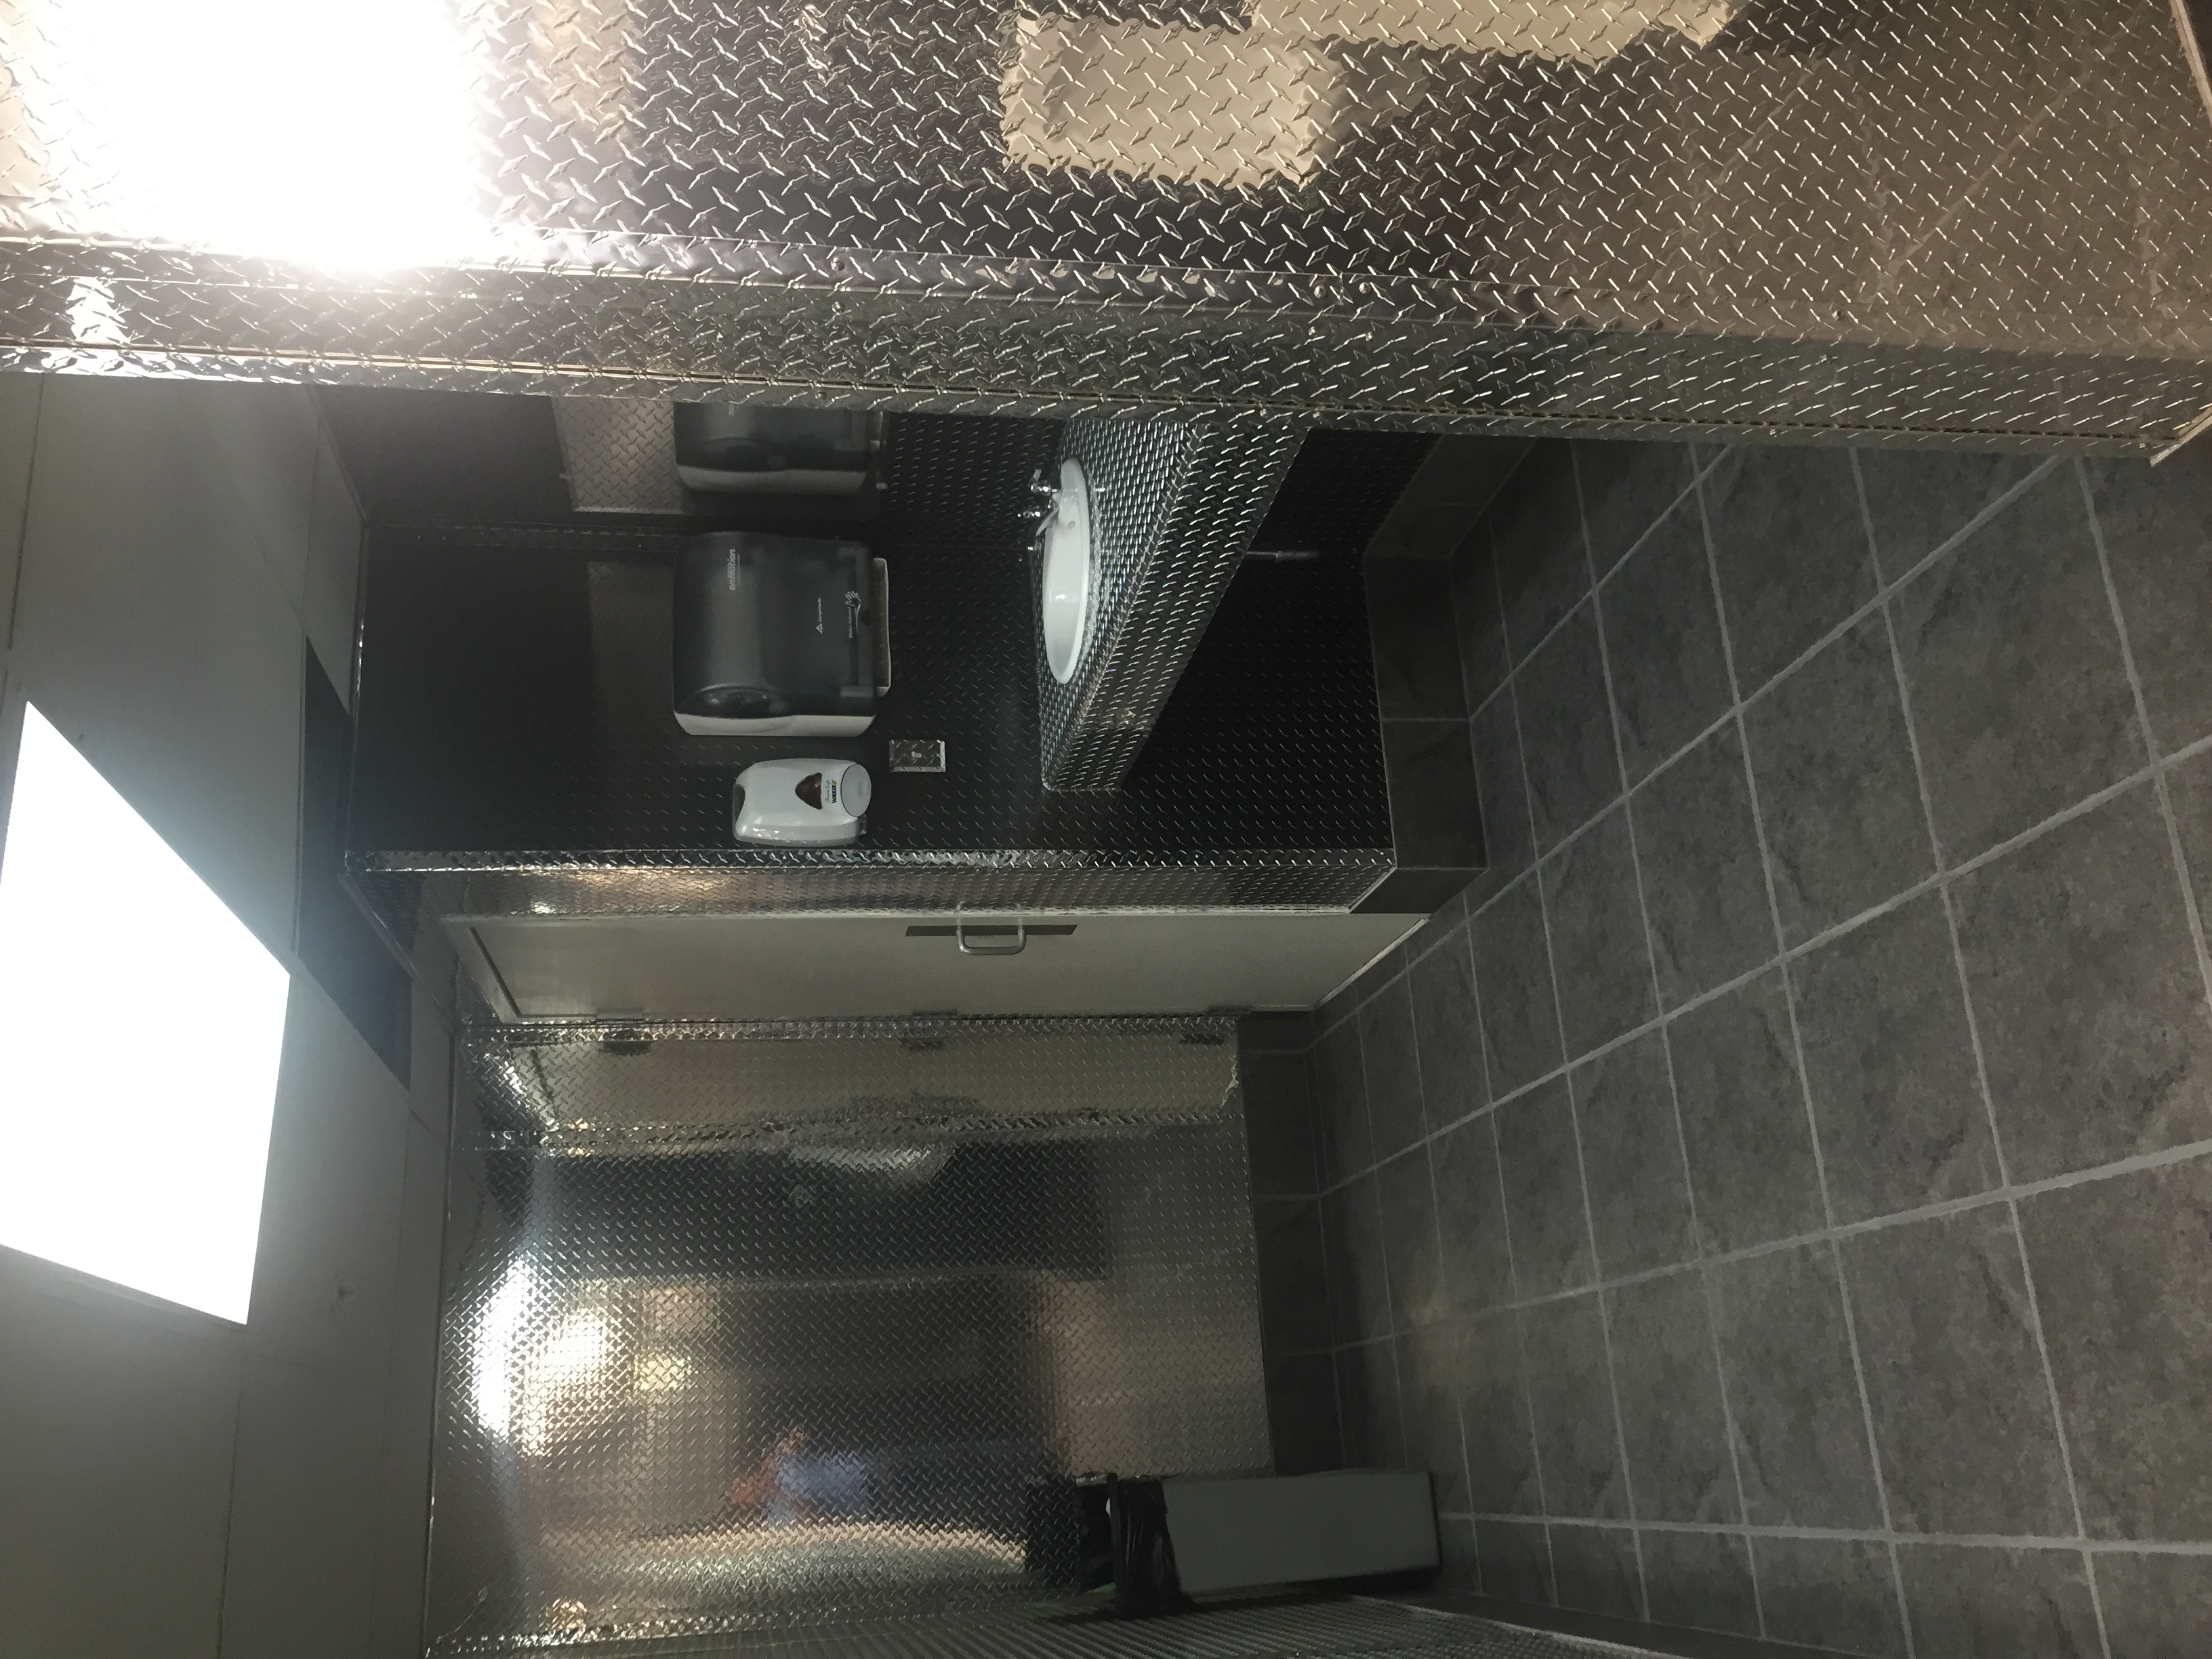 Commercial bathroom using diamond plate wall panels from CutsMetal